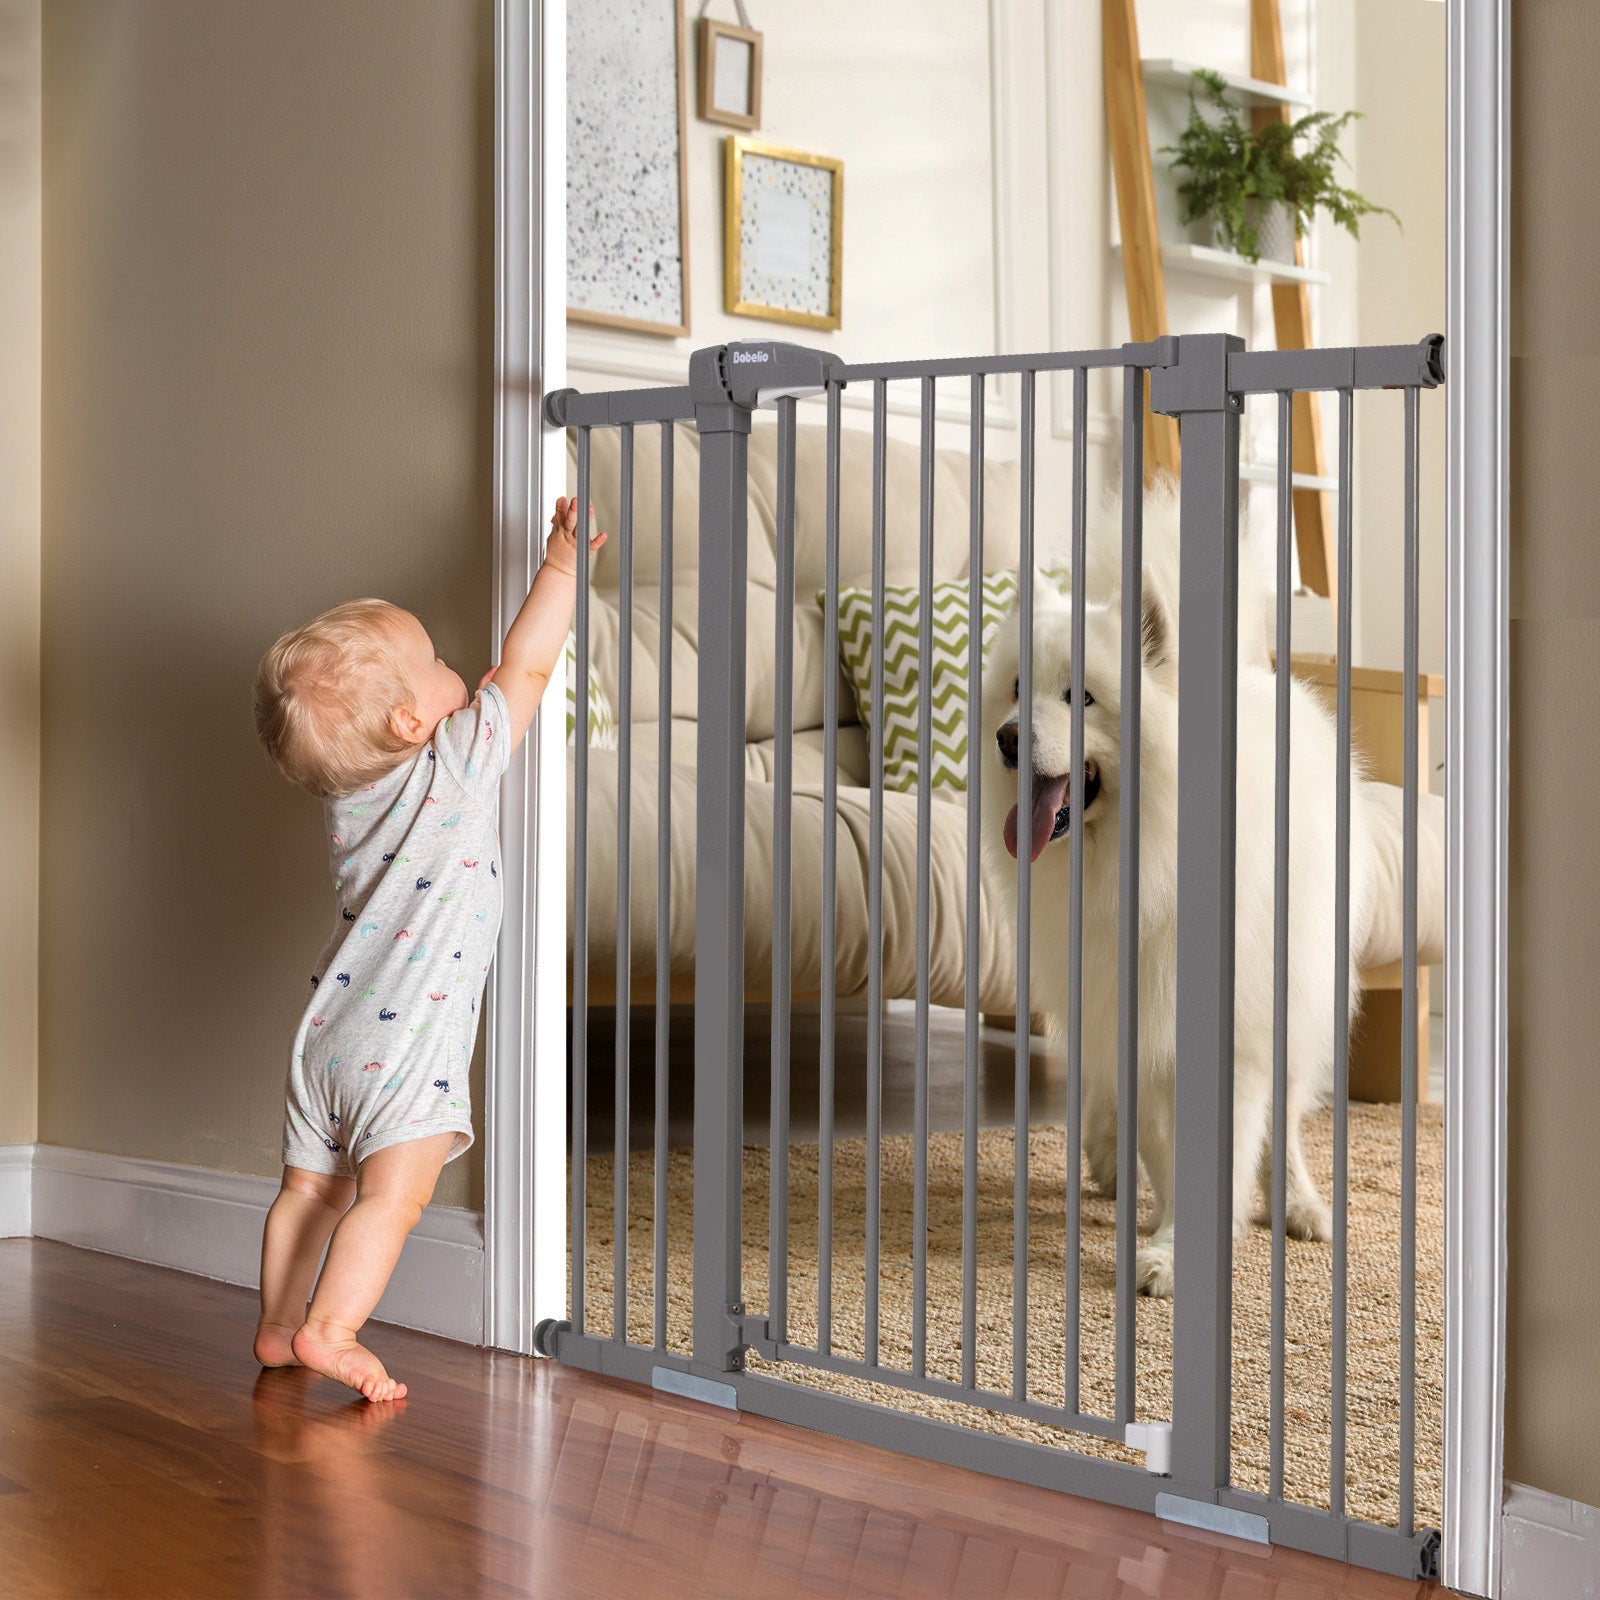 Mom's Choice Award Winner: BABELIO 36" Extra Tall Metal Baby & Pet Gate for Stairs and Doorways - babeliobaby